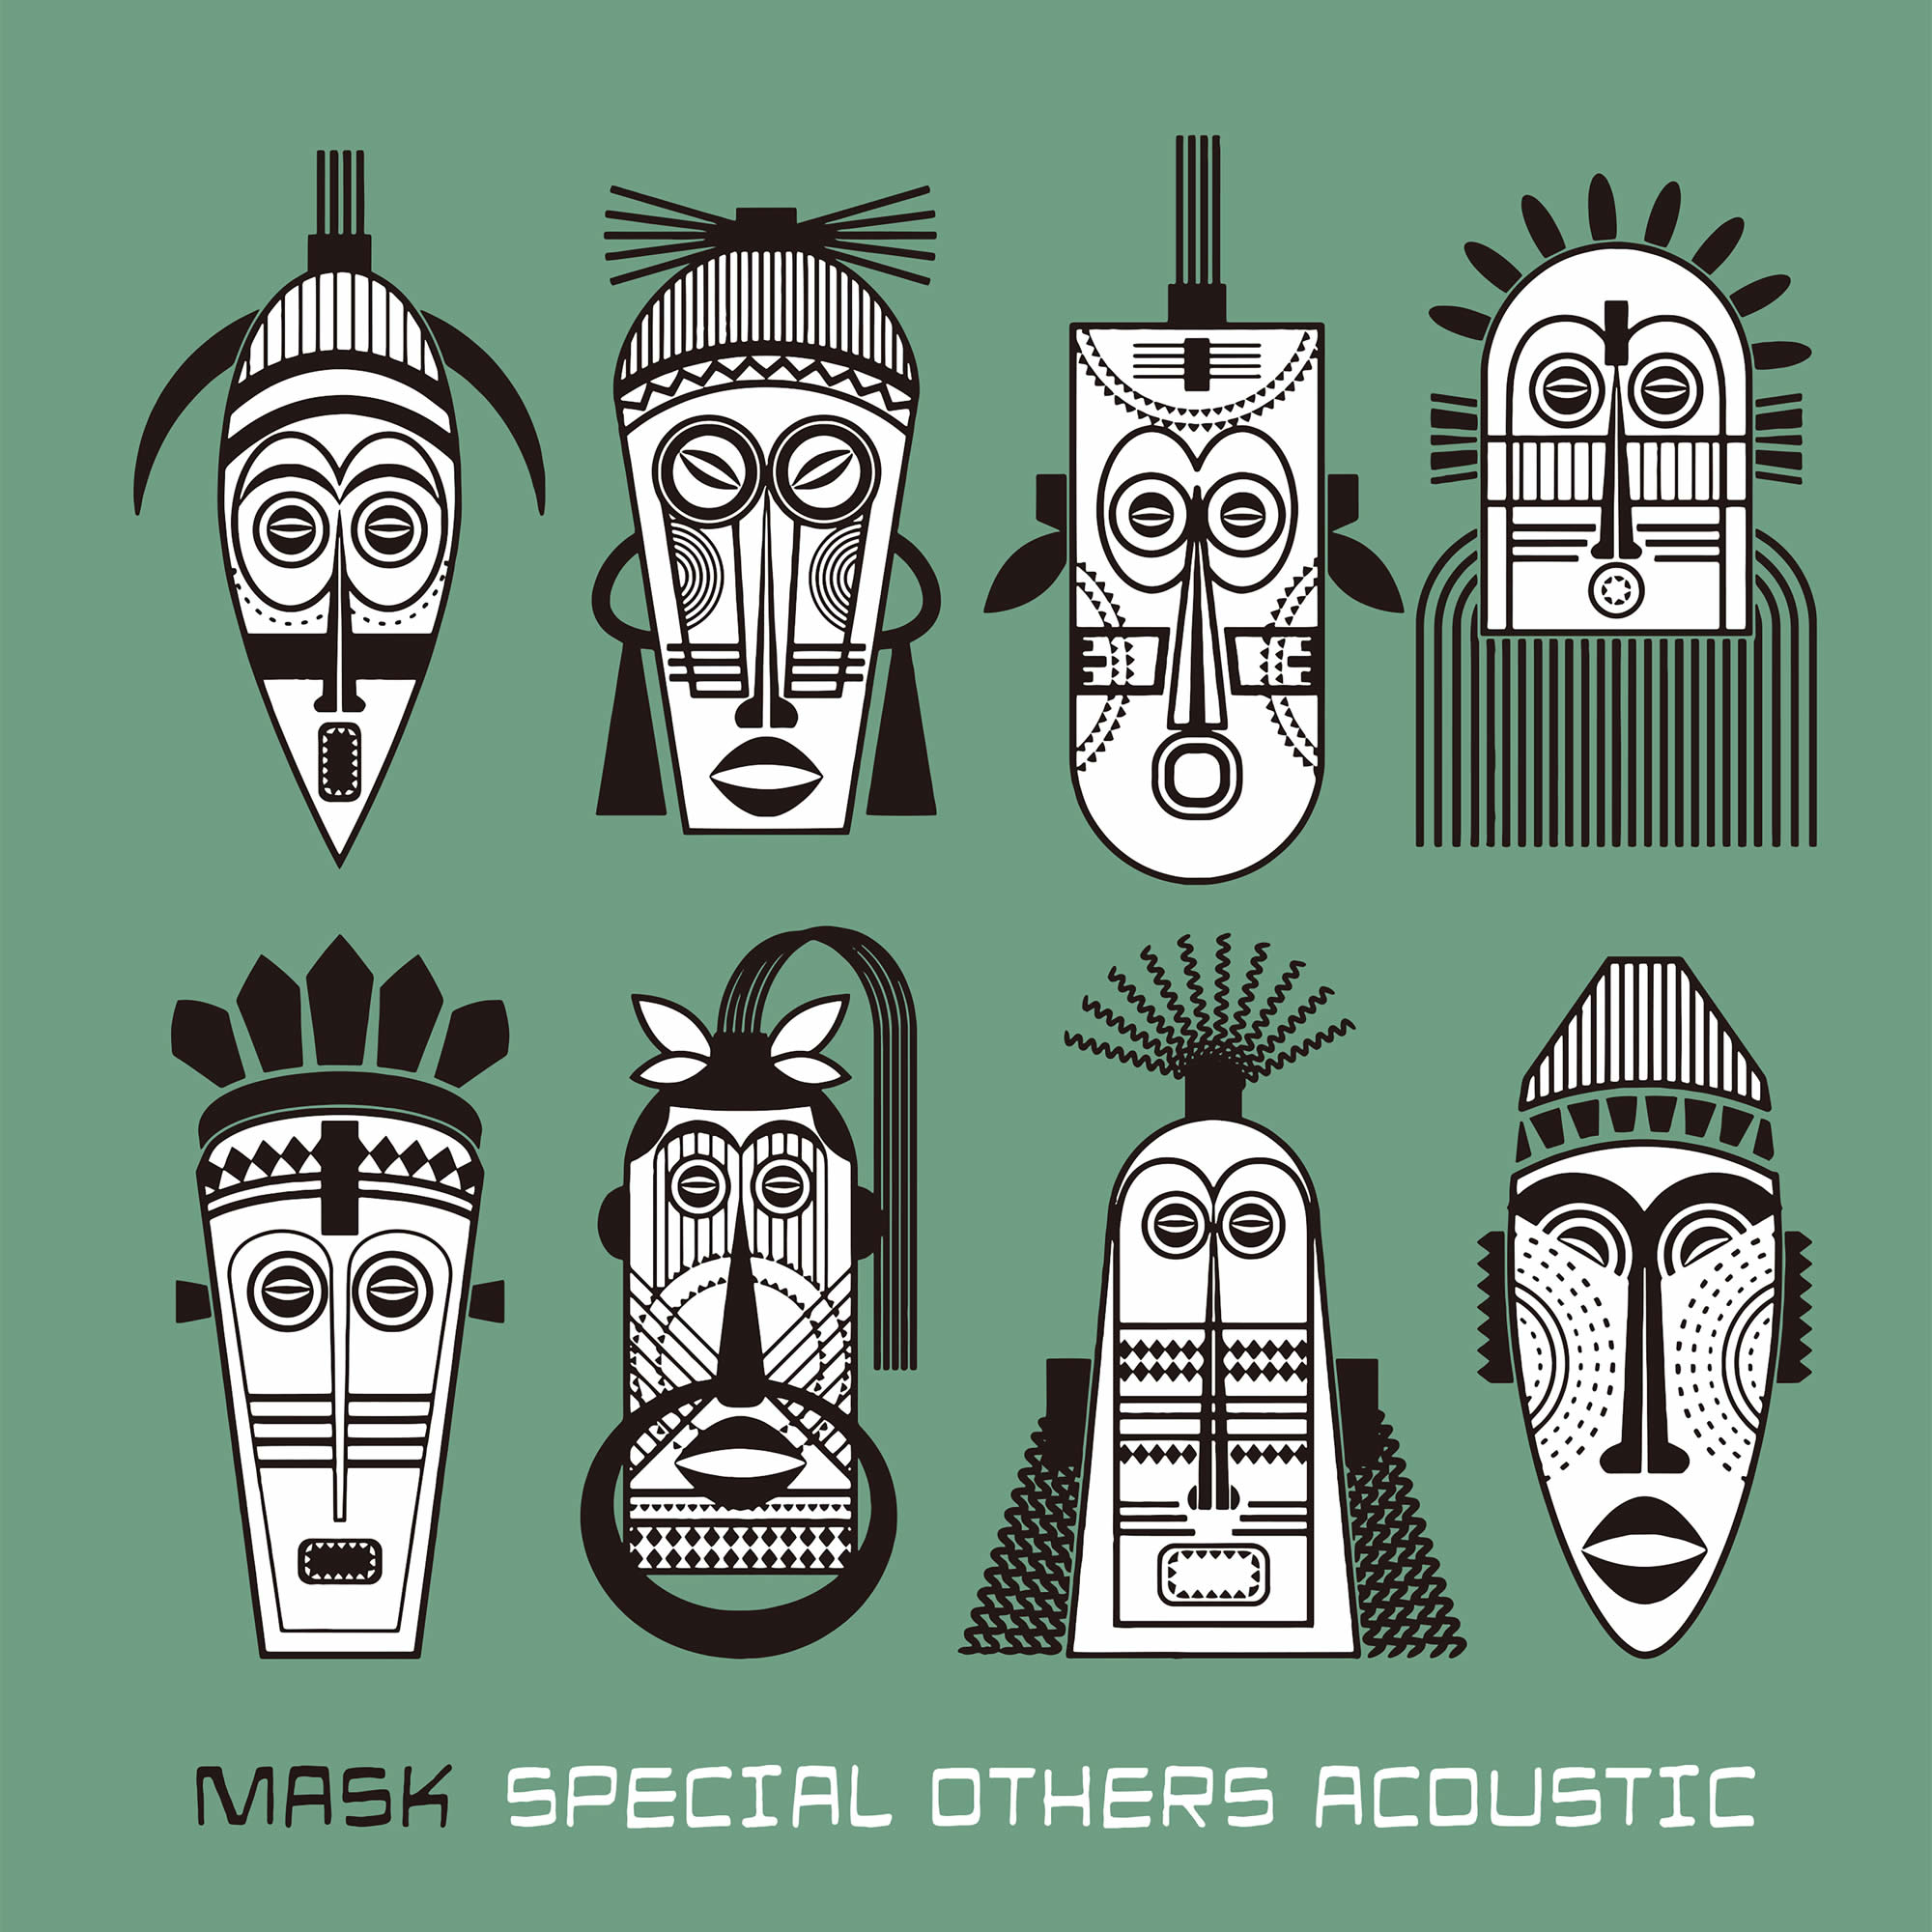 SPECIAL OTHERS ACOUSTIC
『MASK』